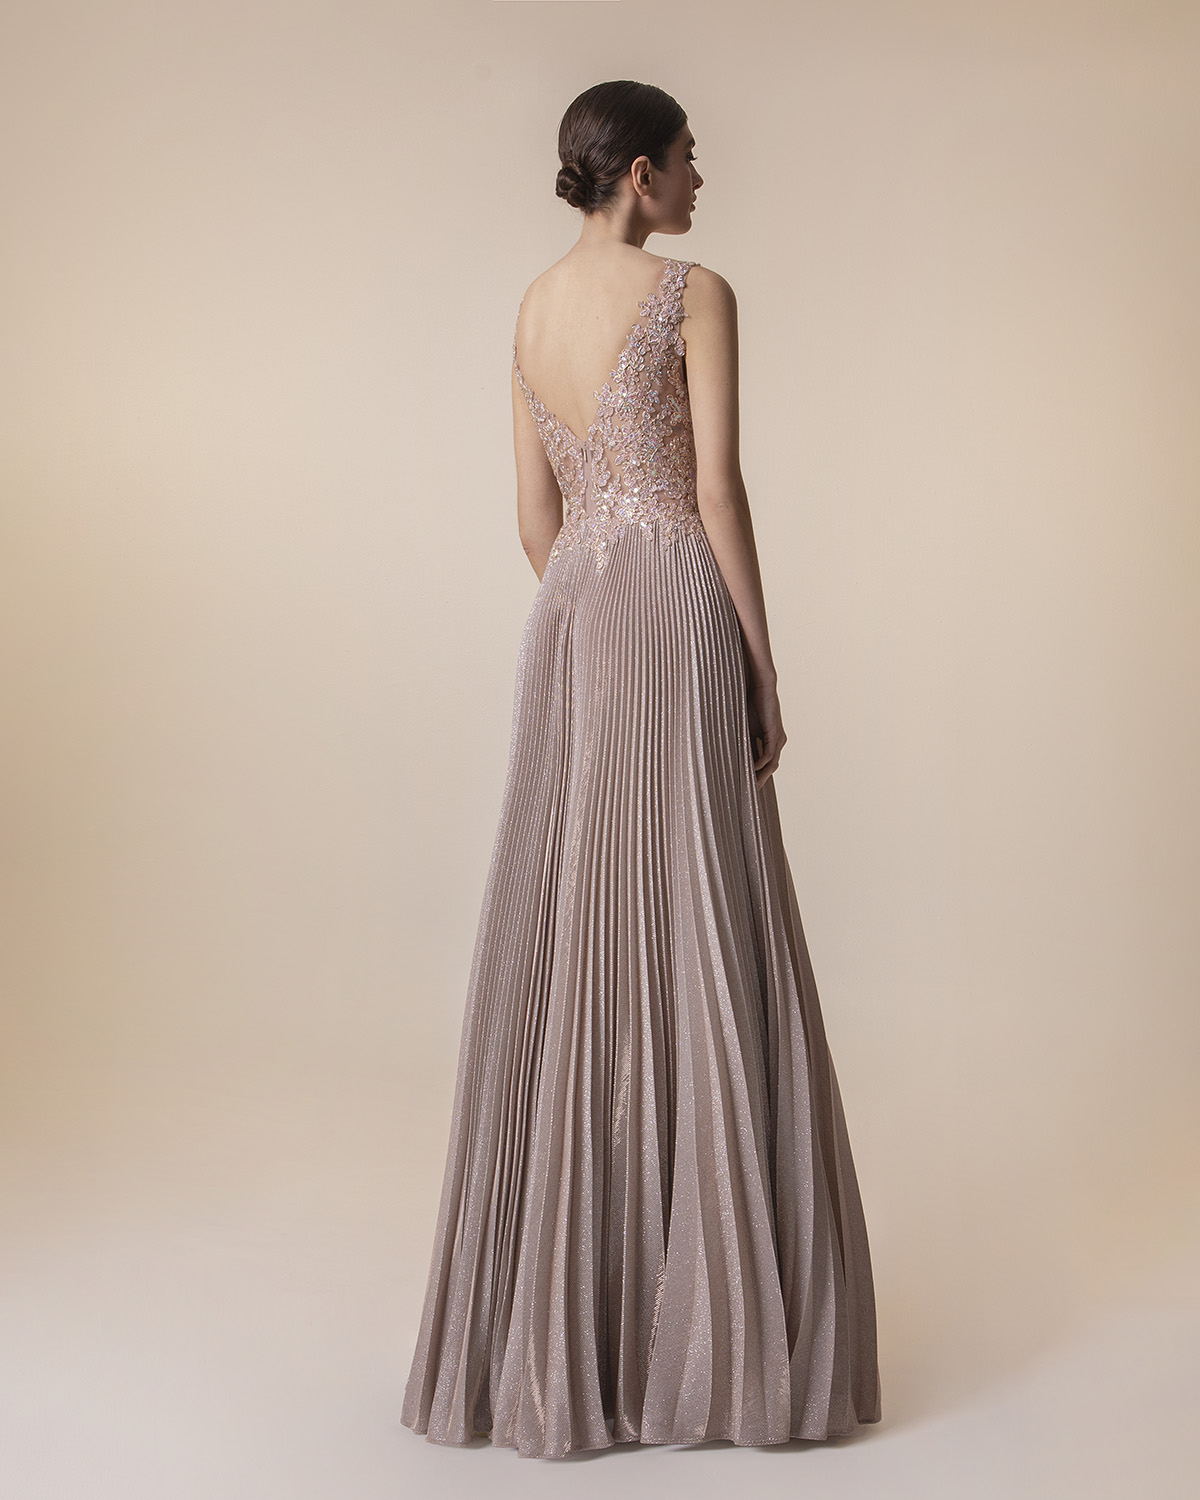 Long pleated dress with shining fabric, applique beaded lace on the top